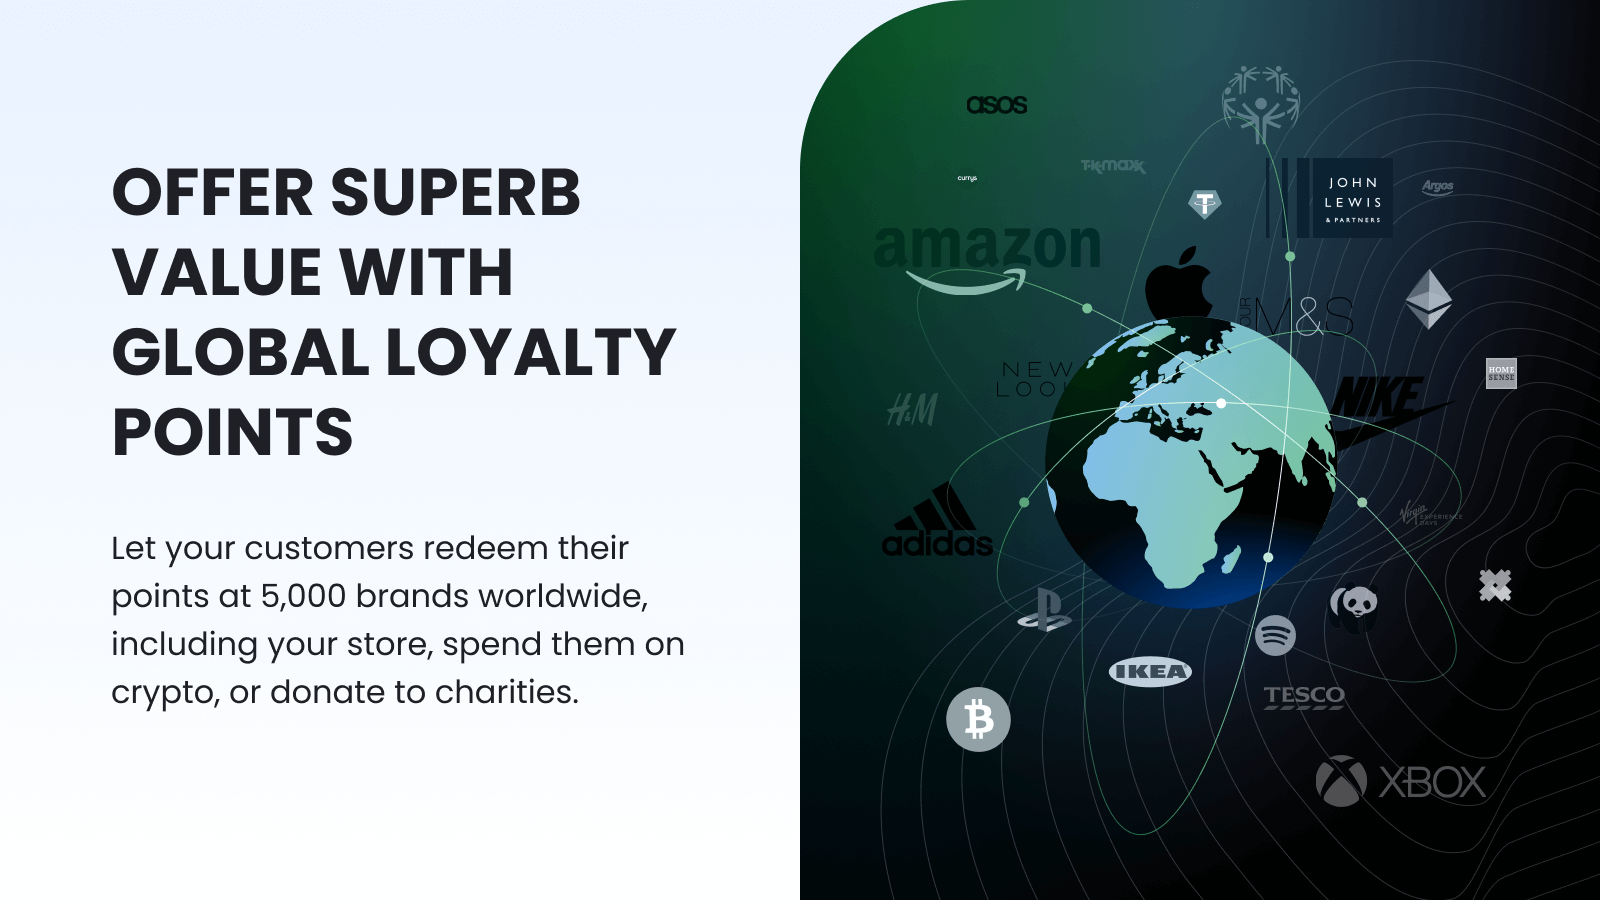 Offer superb value with global loyalty points